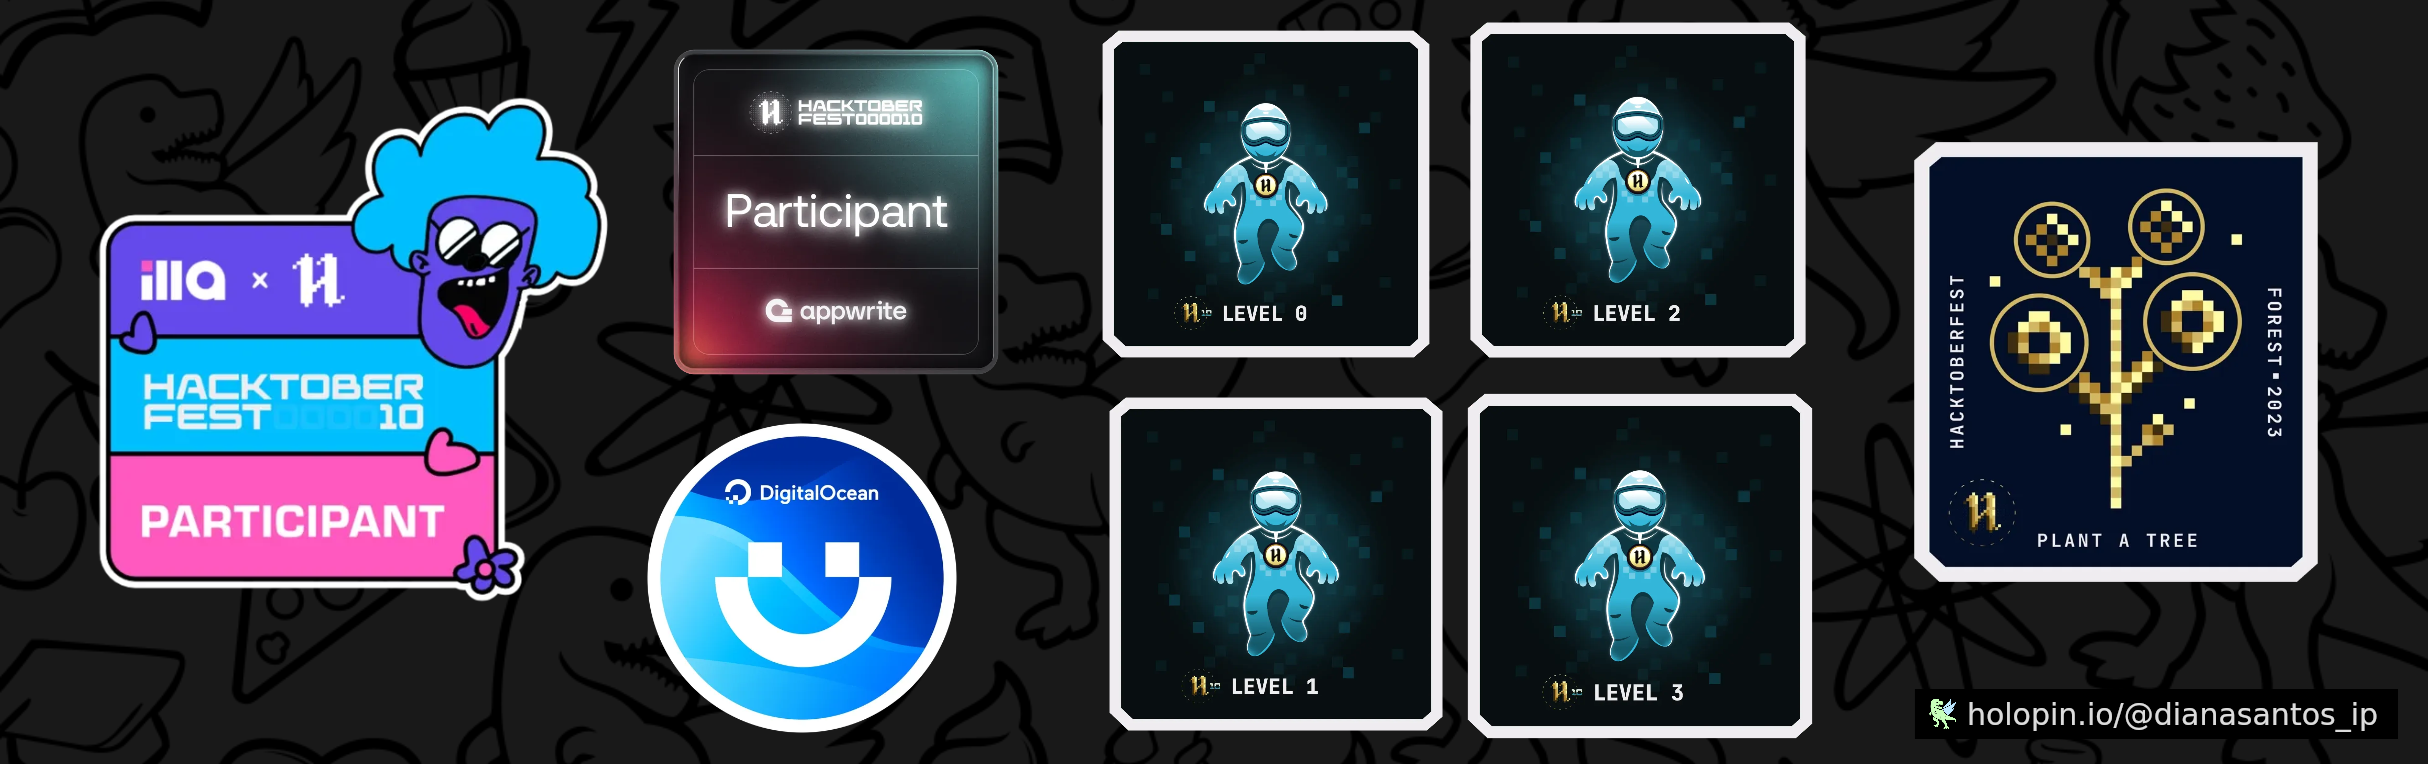 An image of @dianasantos_ip's Holopin badges, which is a link to view their full Holopin profile